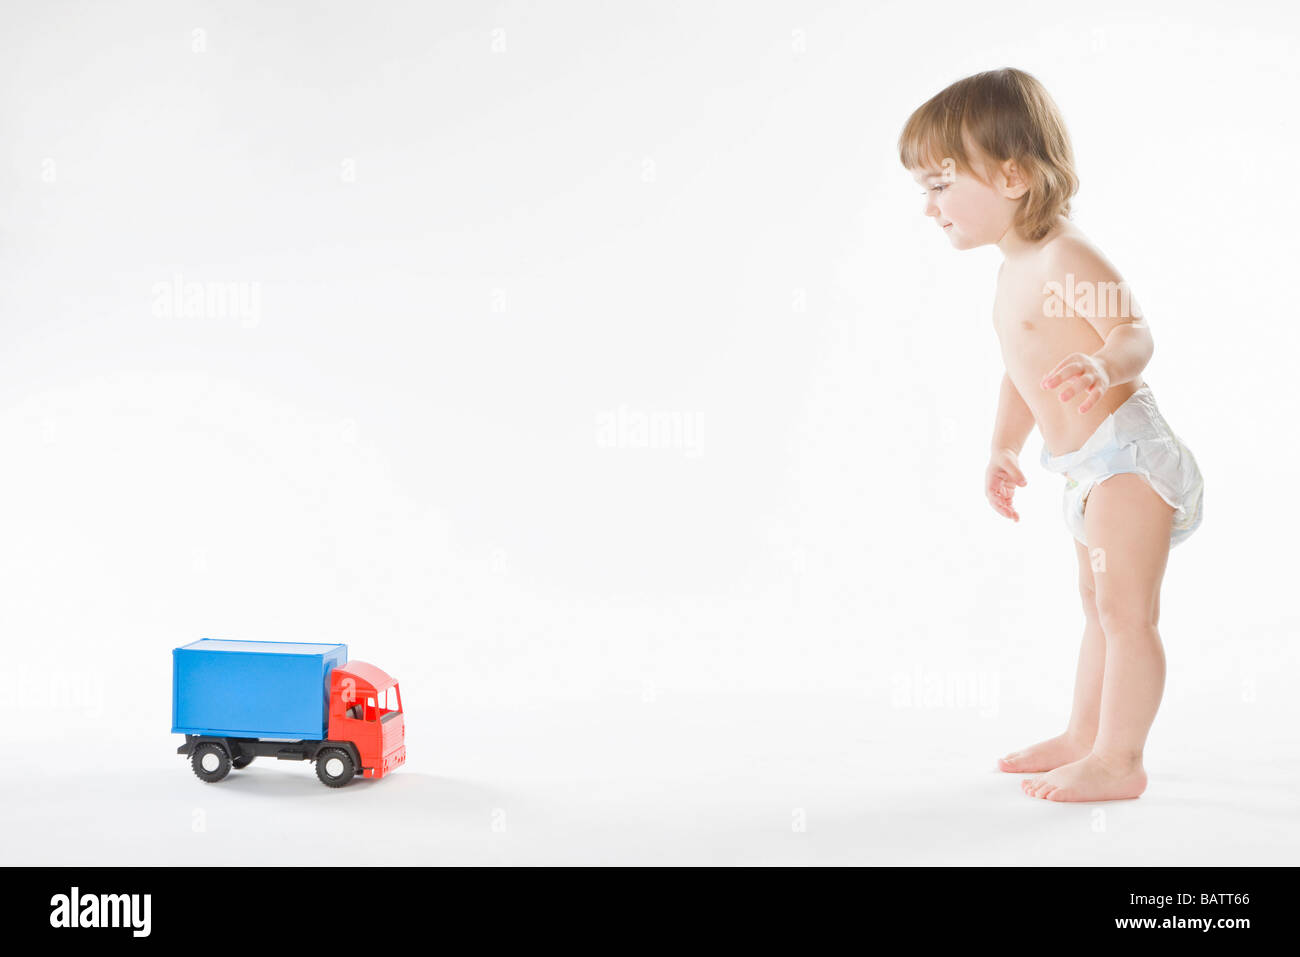 Baby Girl Playing with toy truck Banque D'Images